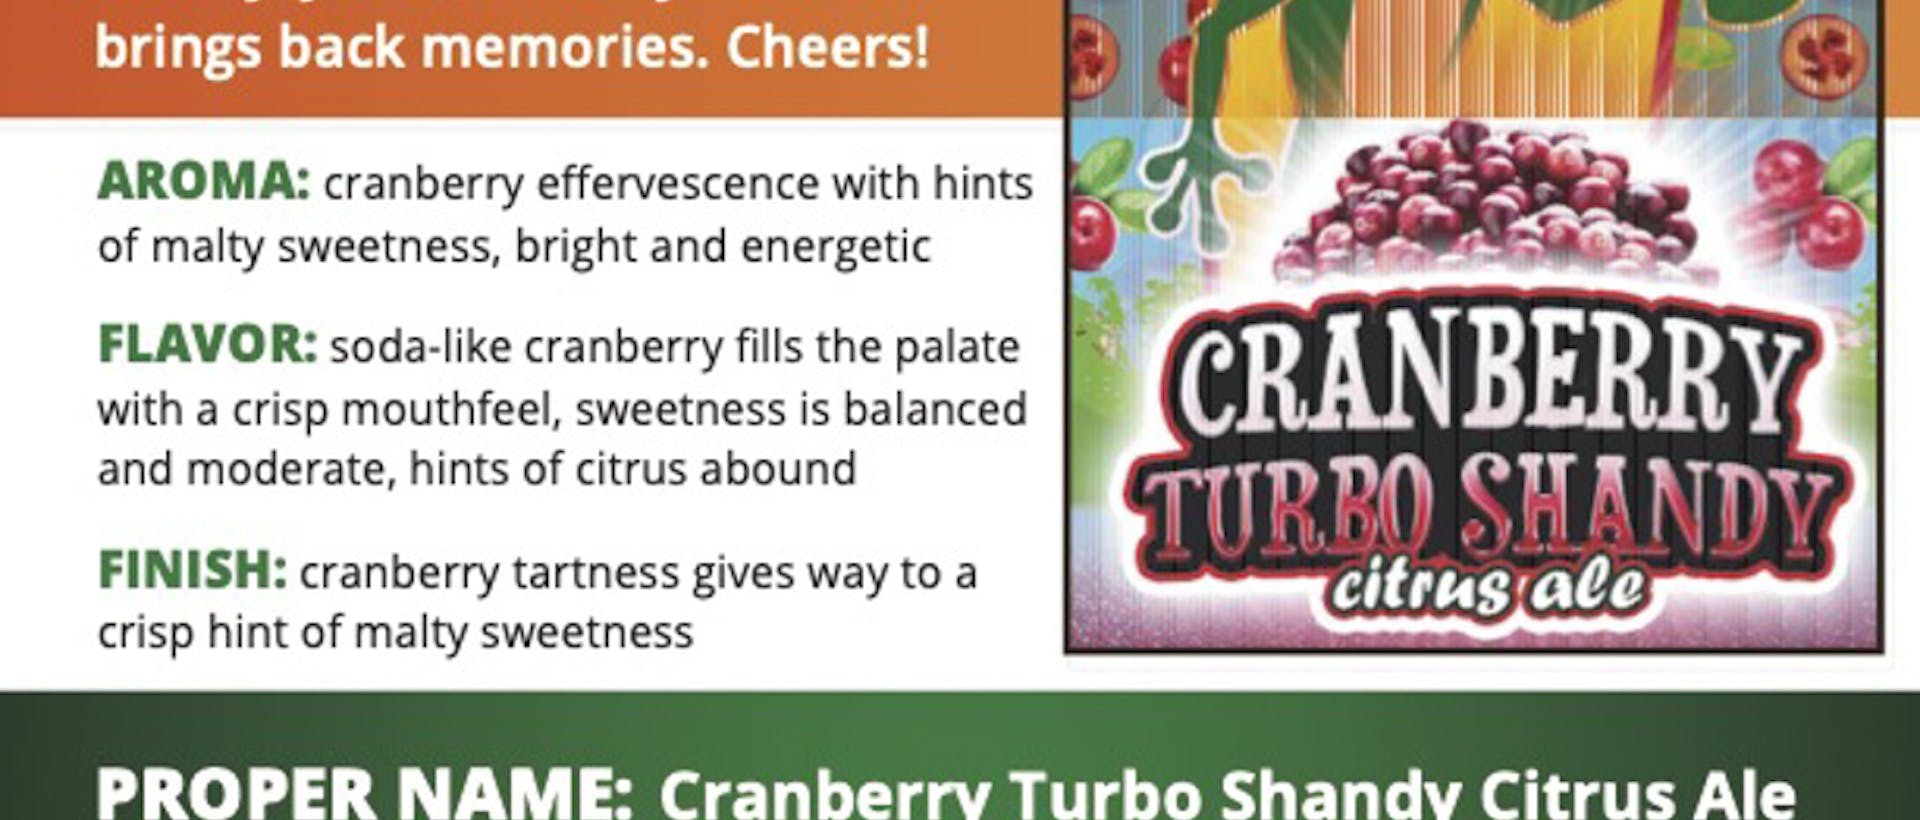 HF_Sell Sheet - Shandy Series - Cranberry Turbo Shandy Citrus Ale (updated 9-01-2022)